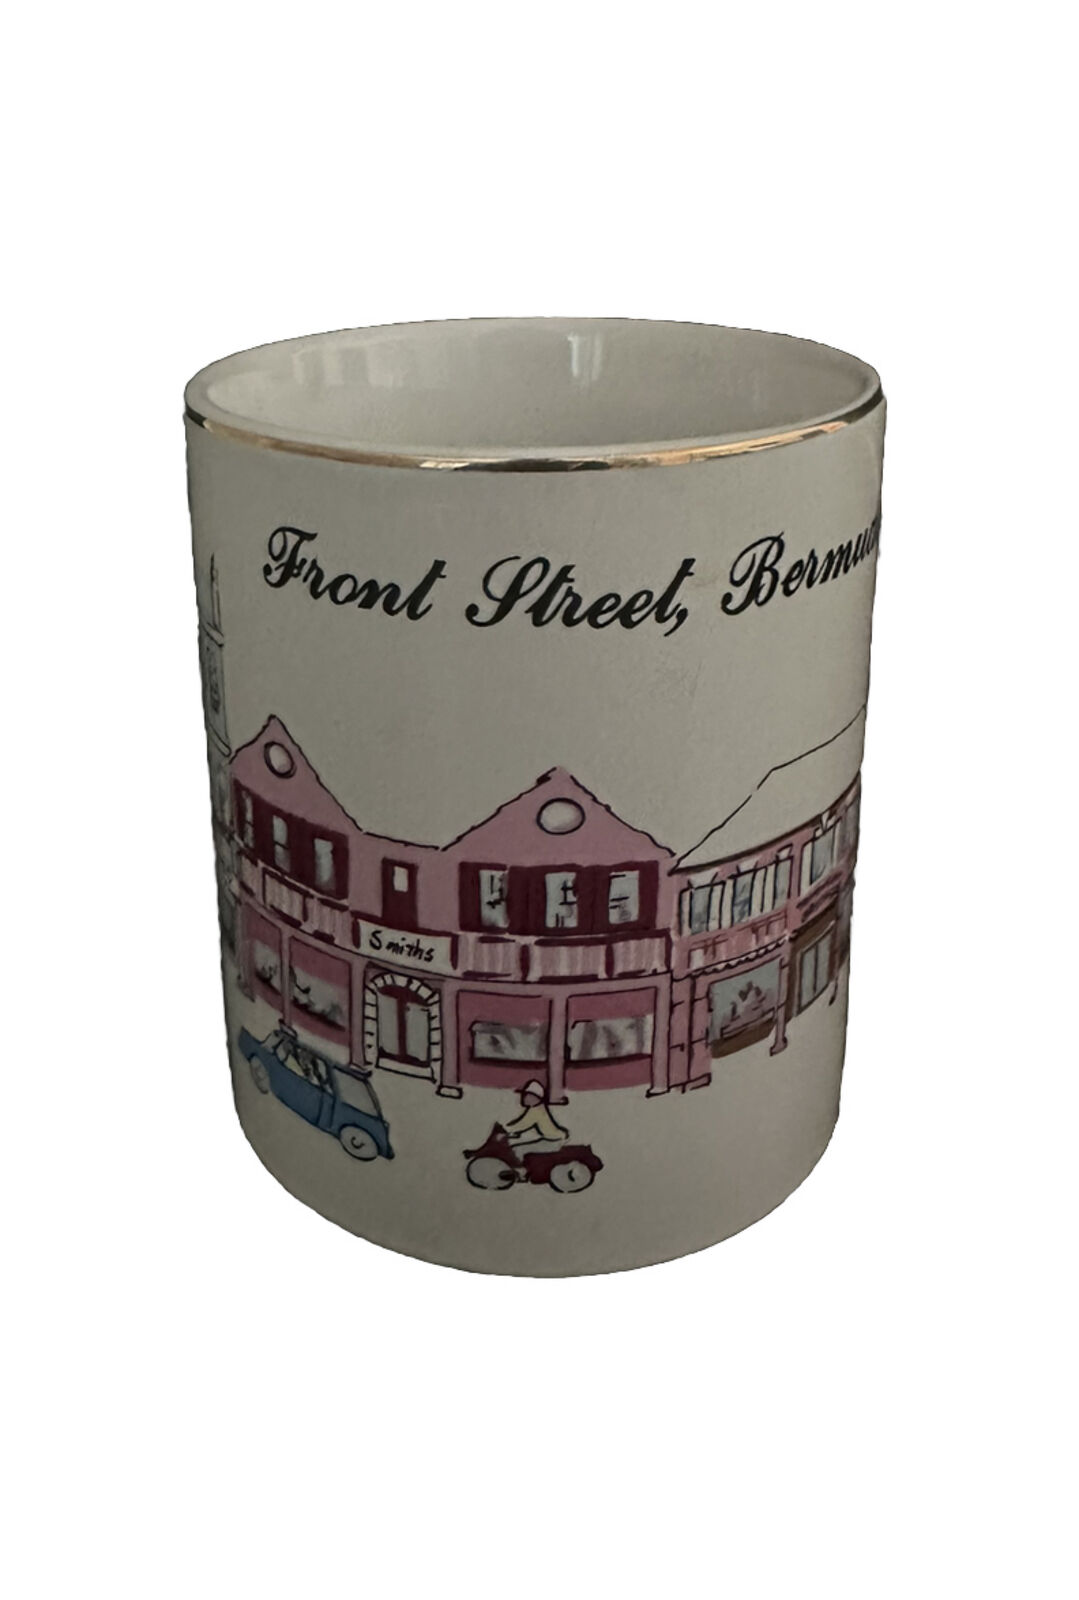 Front Street Bermuda Gold Trimmed Coffee Mug Japan - 4 Available